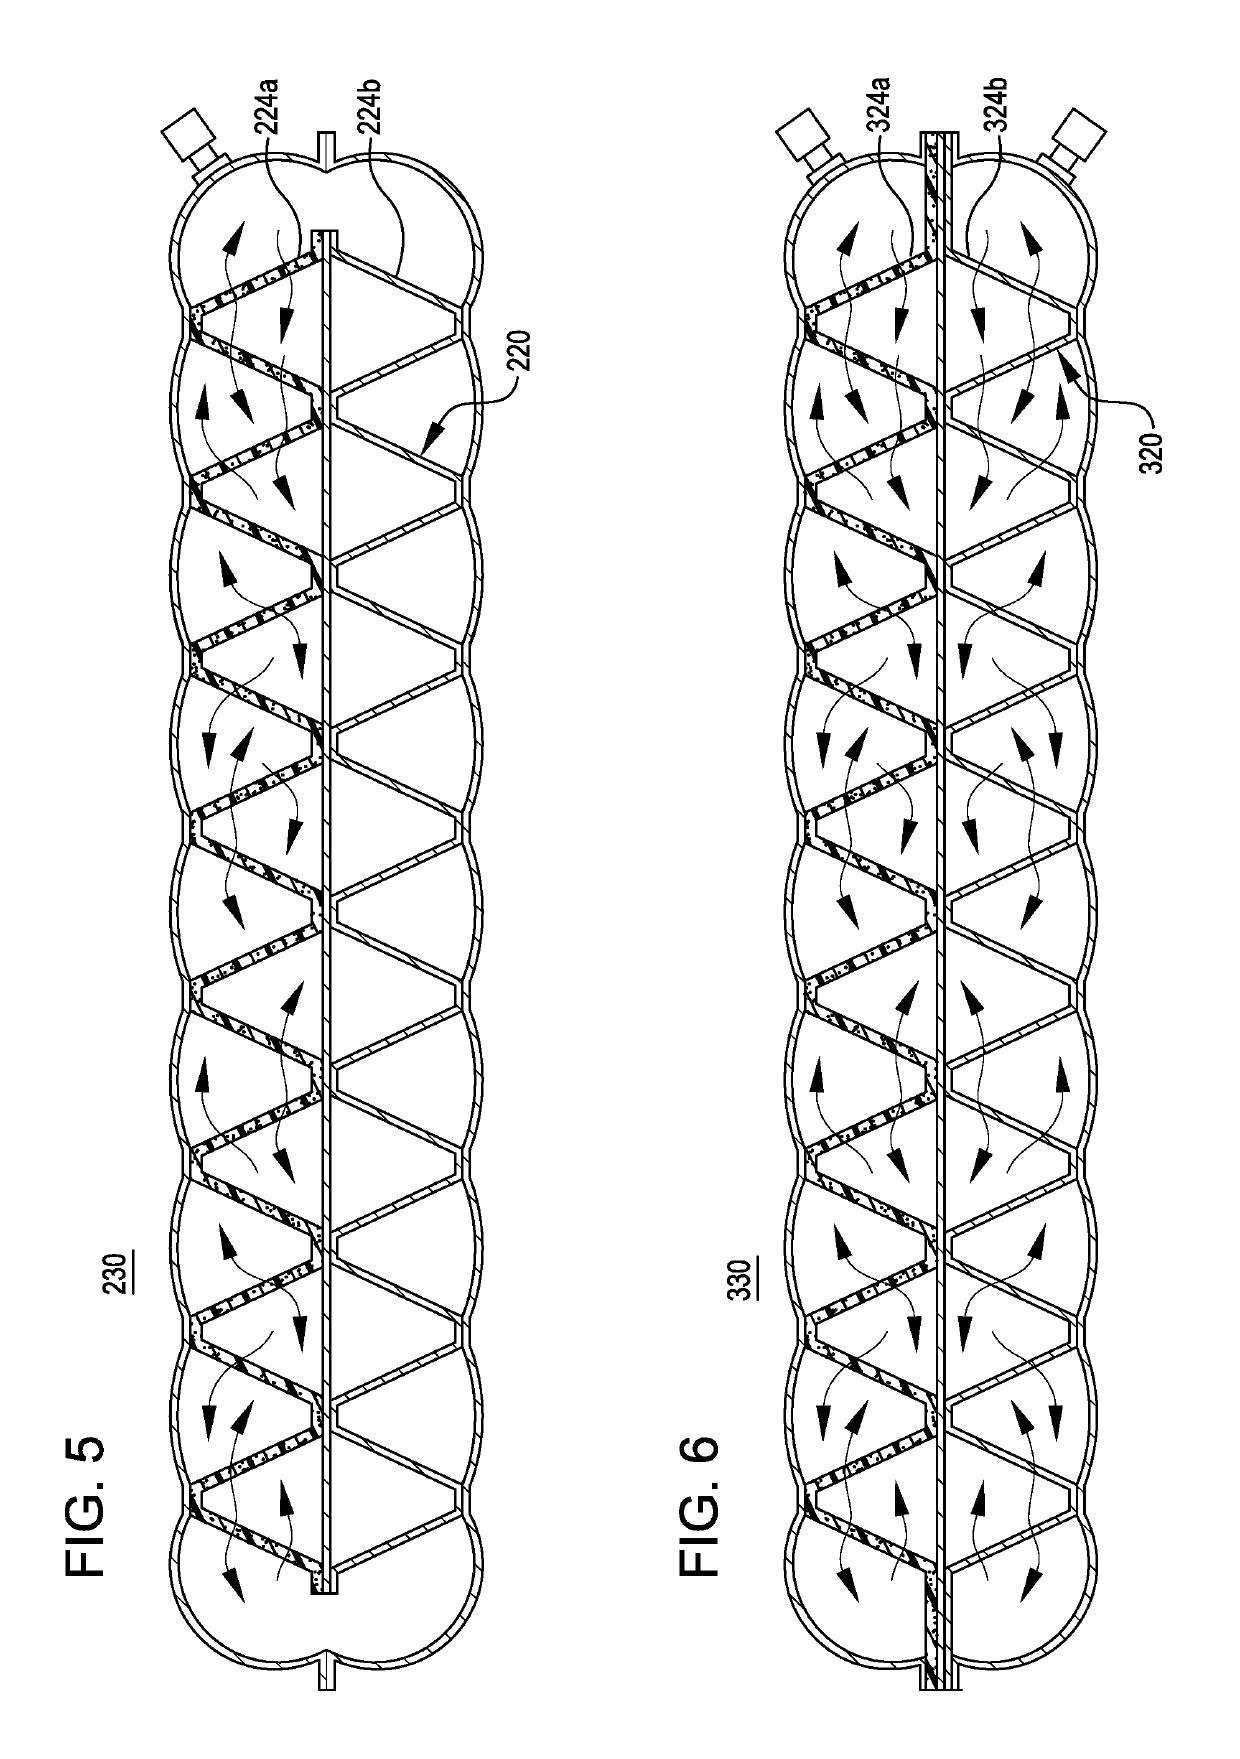 Cellular matrix with integrated radiant and/or convection barriers particularly for use with inflatable bodies